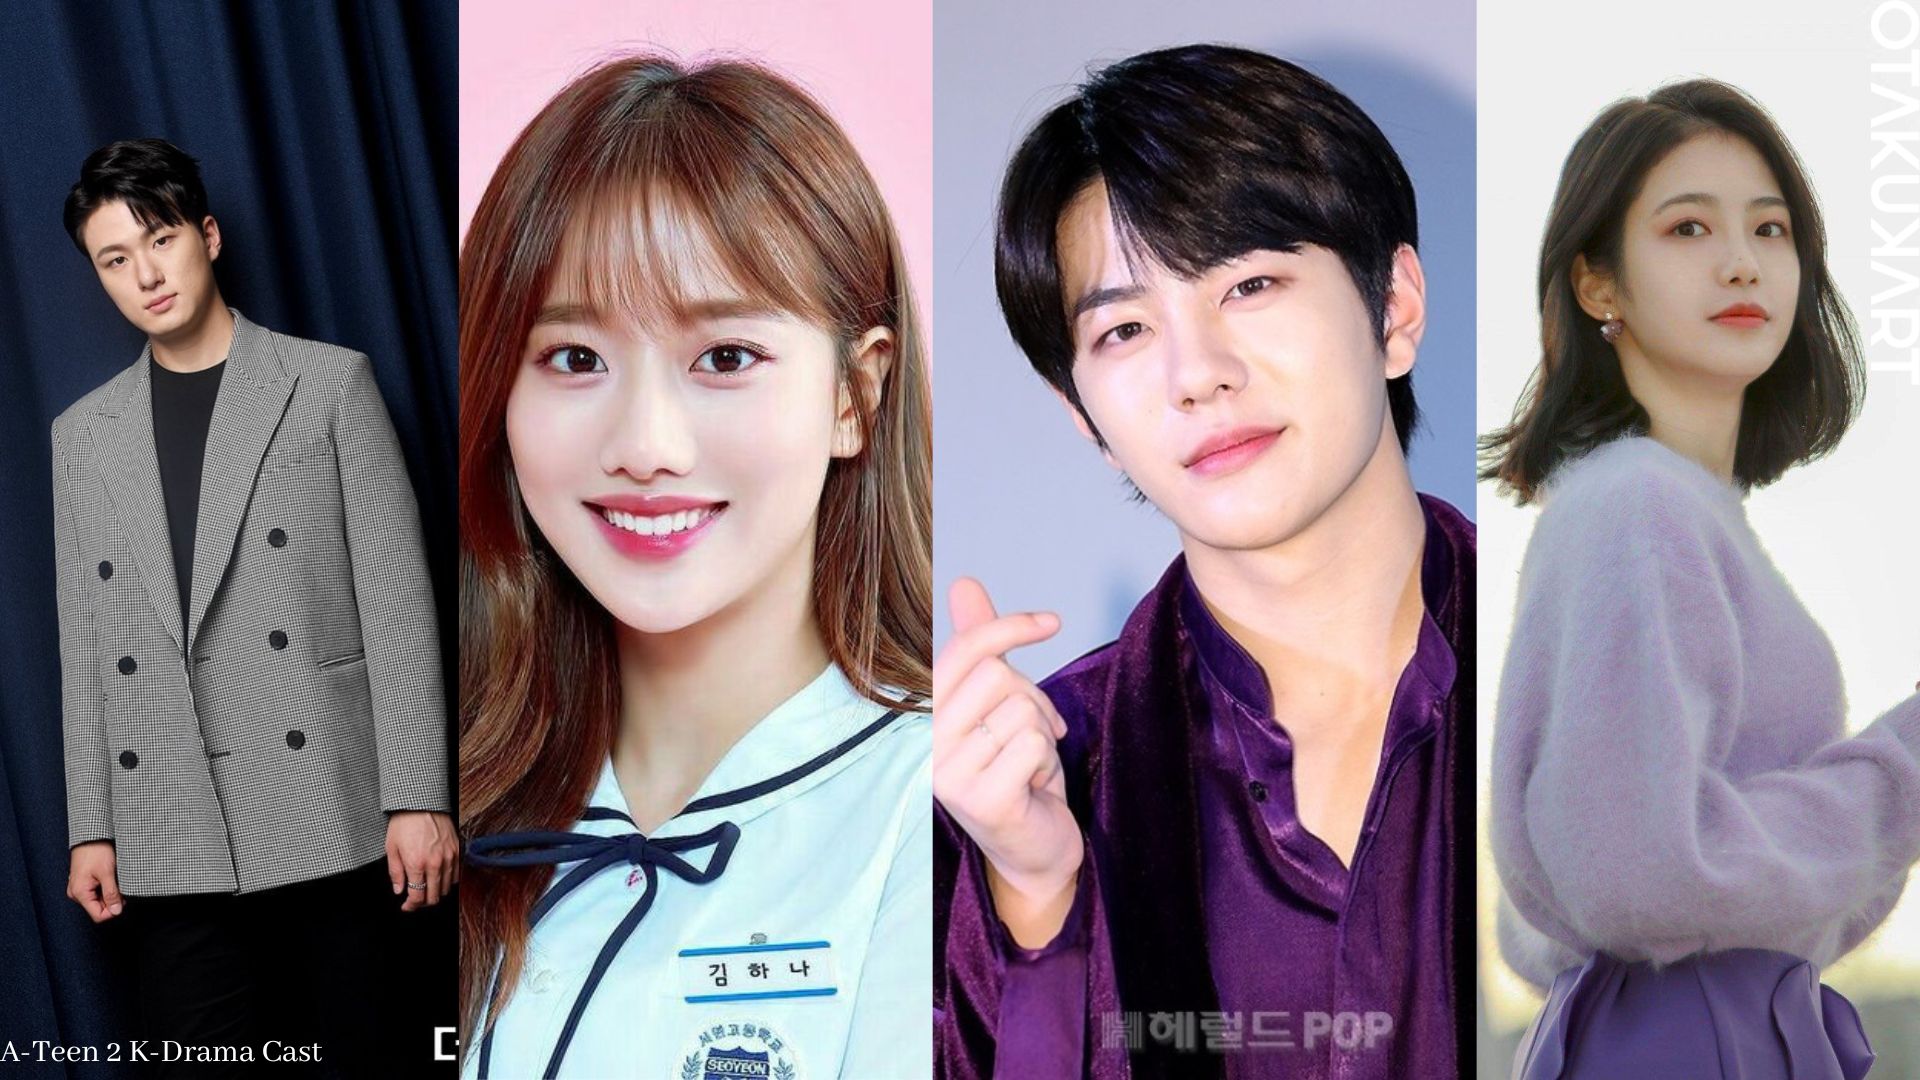 A-Teen 2 K-Drama Cast: Know All About Them!